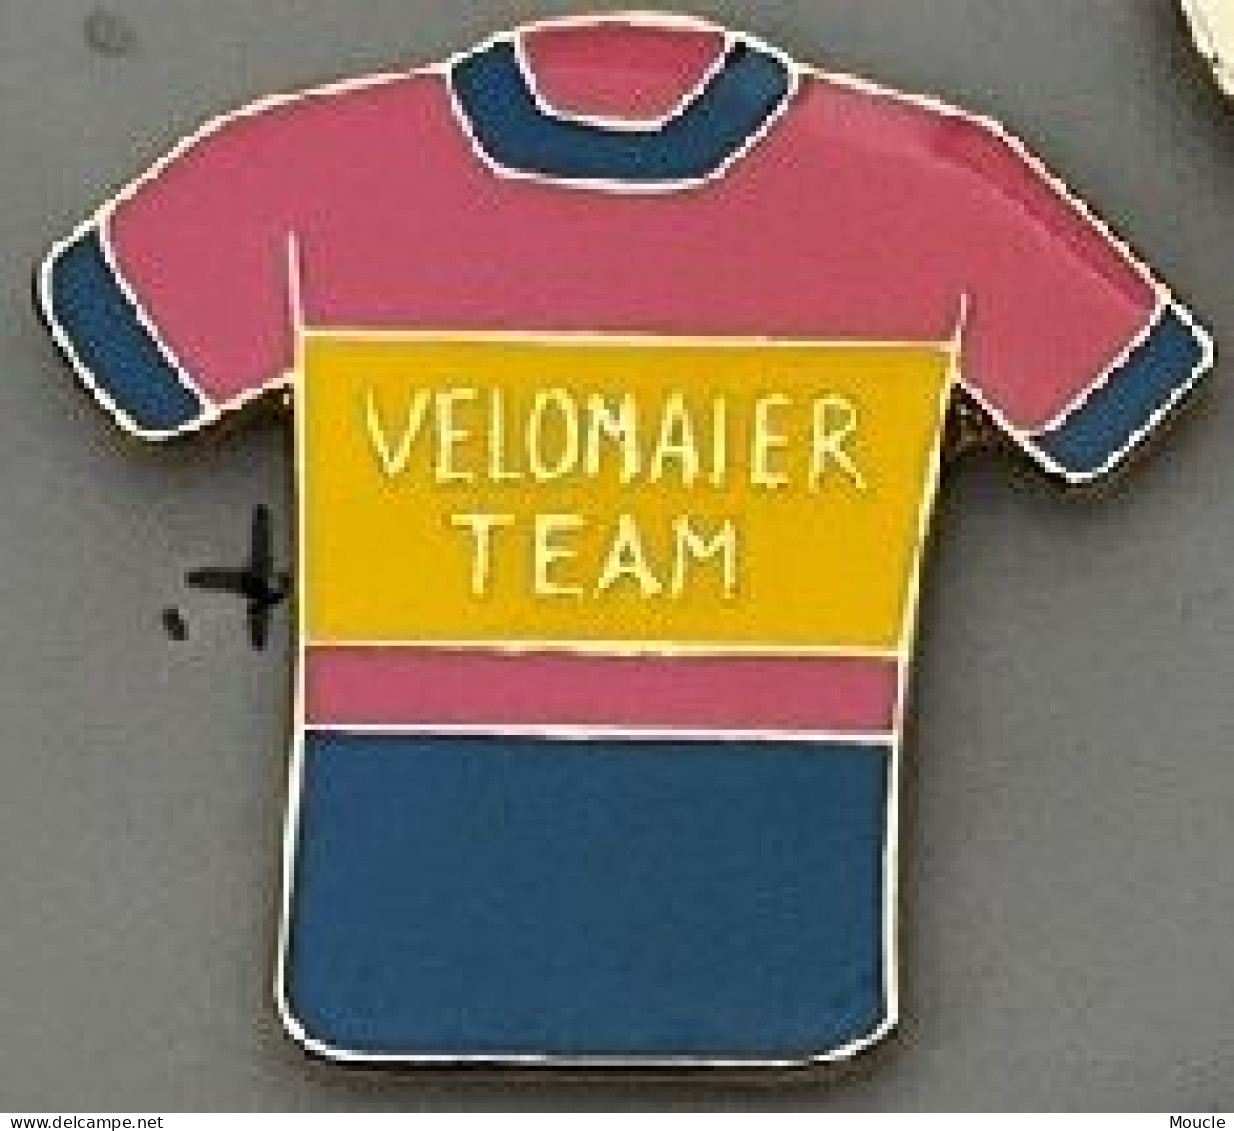 CYCLISME - VELO - BIKE - CYCLISTE - CYCLES - MAILLOT VELOMAIER TEAM - N° 441 / 500   - (32) - Cycling